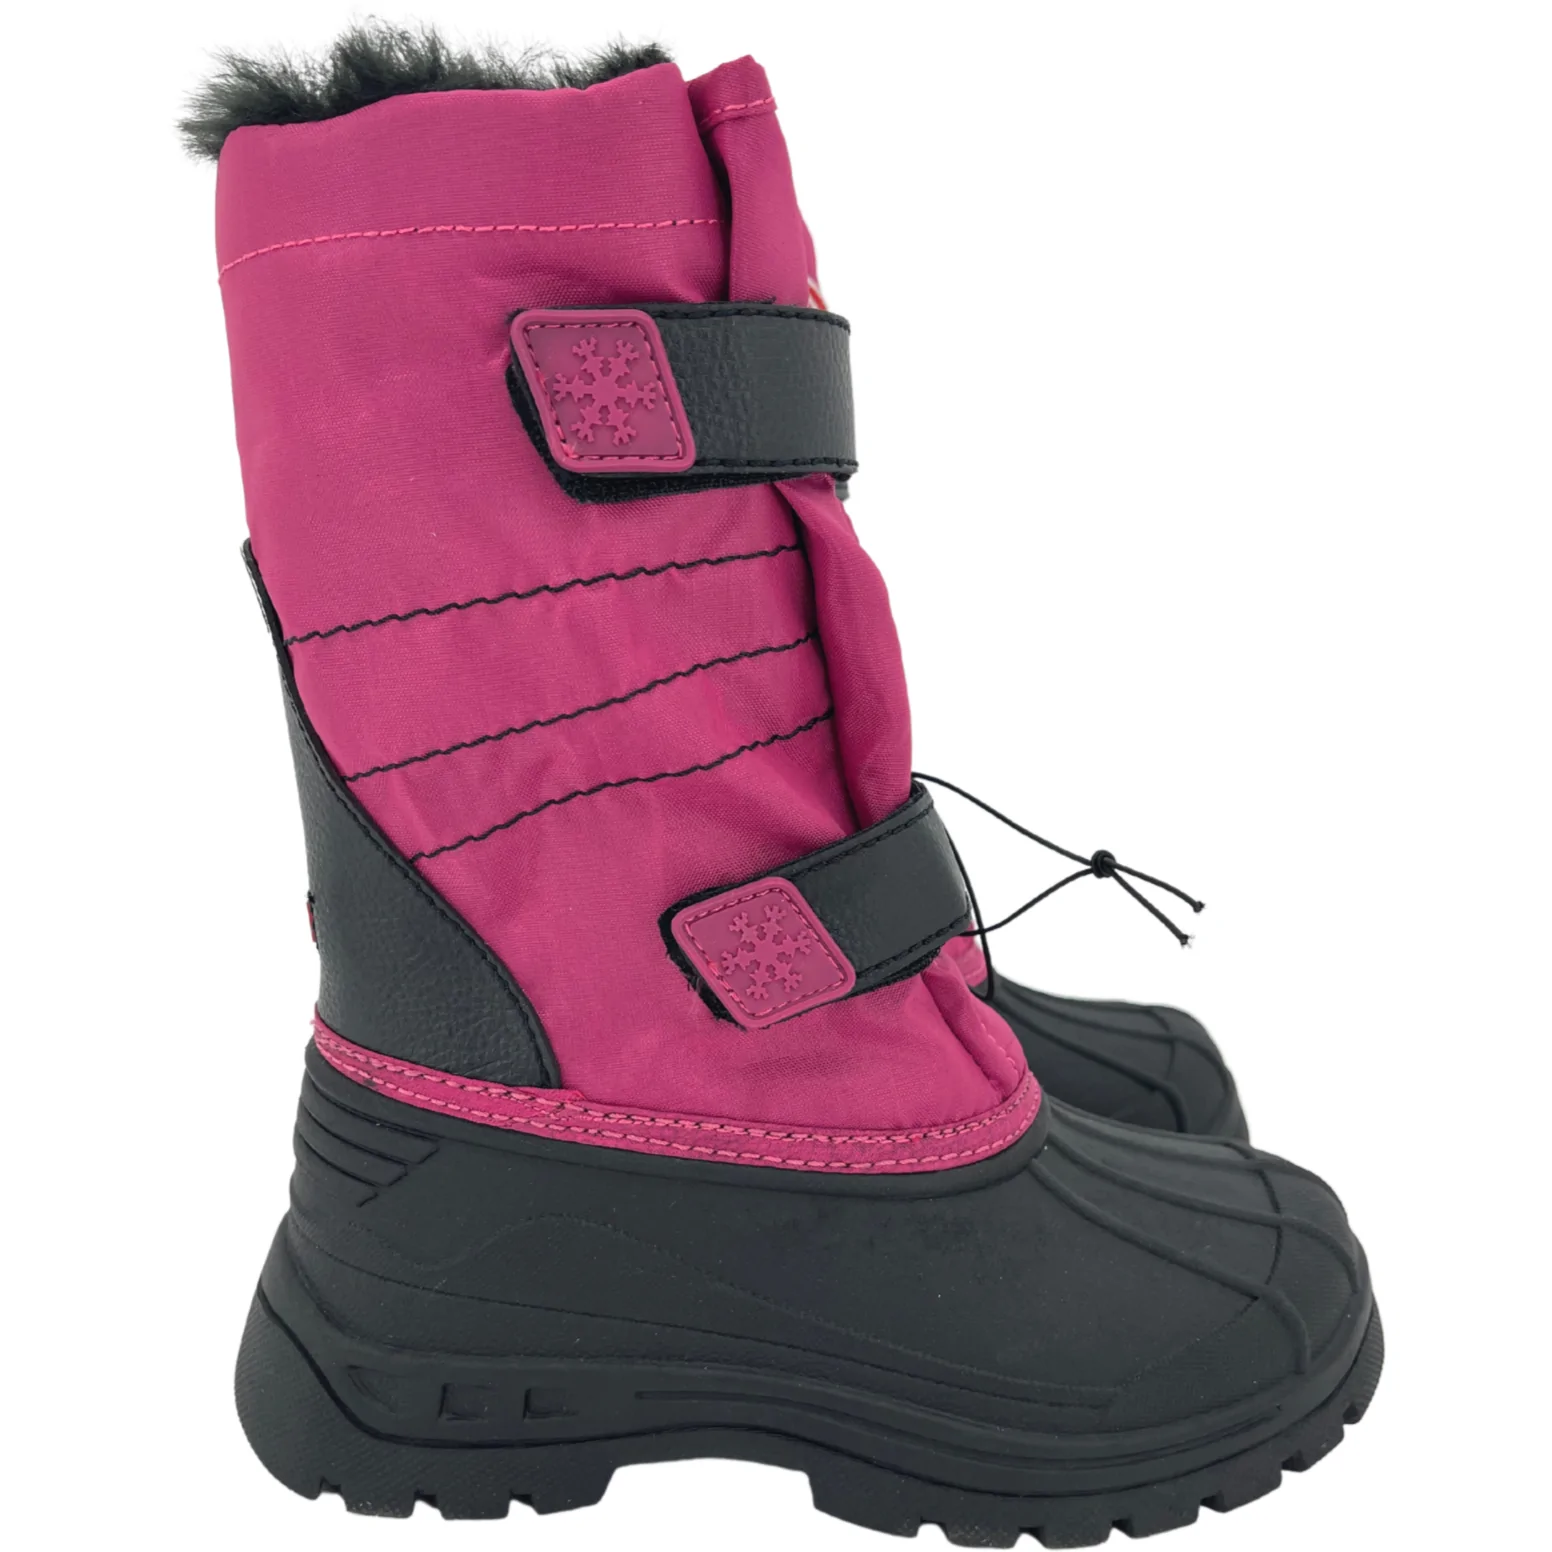 La Neige Kids Winter Boots / Girl's / Waterproof / Removable Liners / Pink / Various Sizes